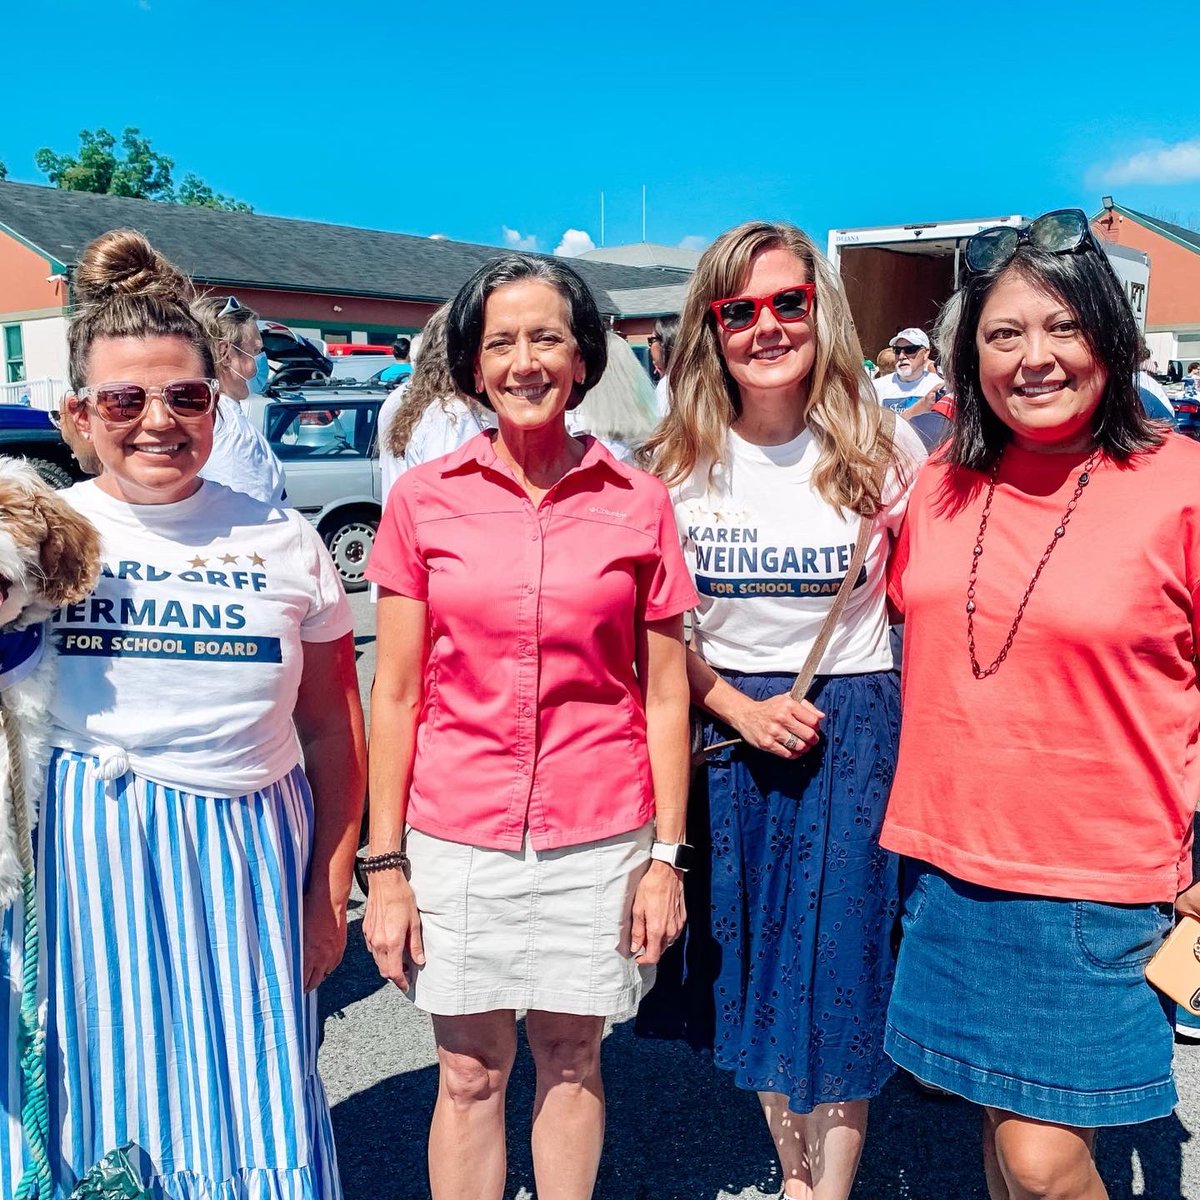 #Happybirthday, America! 🇺🇸
Our team was proud to celebrate the #4thofJuly in #Skippackpa today with community leaders, our families, friends, pups, and  thousands of star-spangled parade goers!
❤️🤍💙🗽⭐️
Thank You Skippack Democrats for the invite! ✌🏽
#IndependenceDay